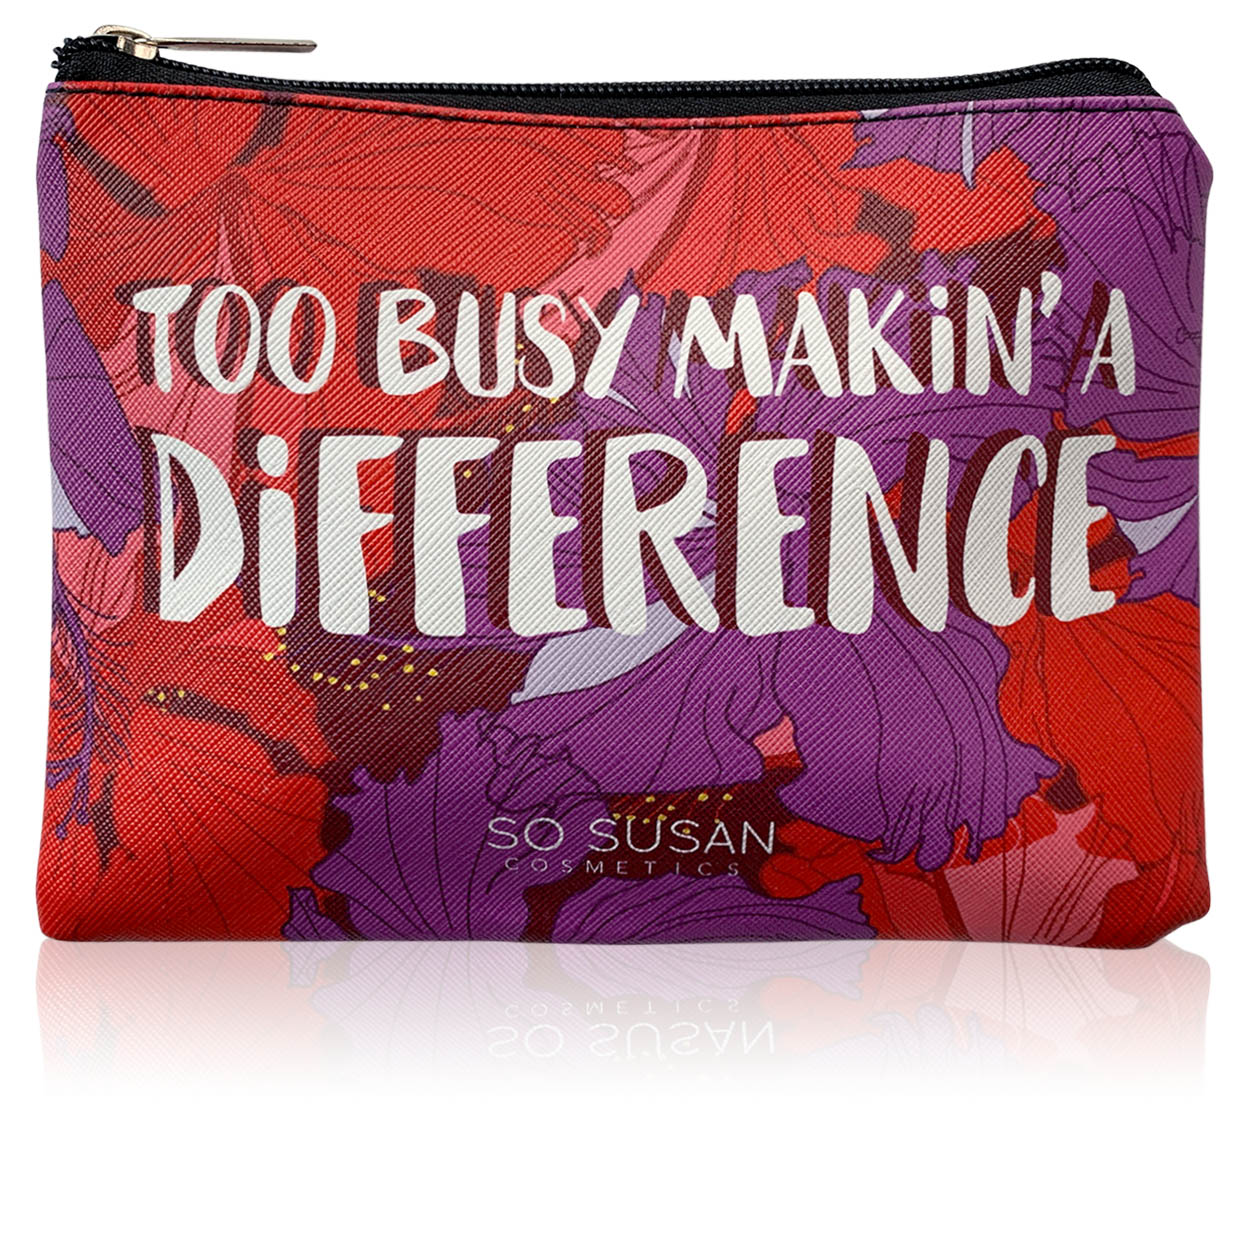 Limited-Edition Makeup Bag - Too Busy Makin' A Difference